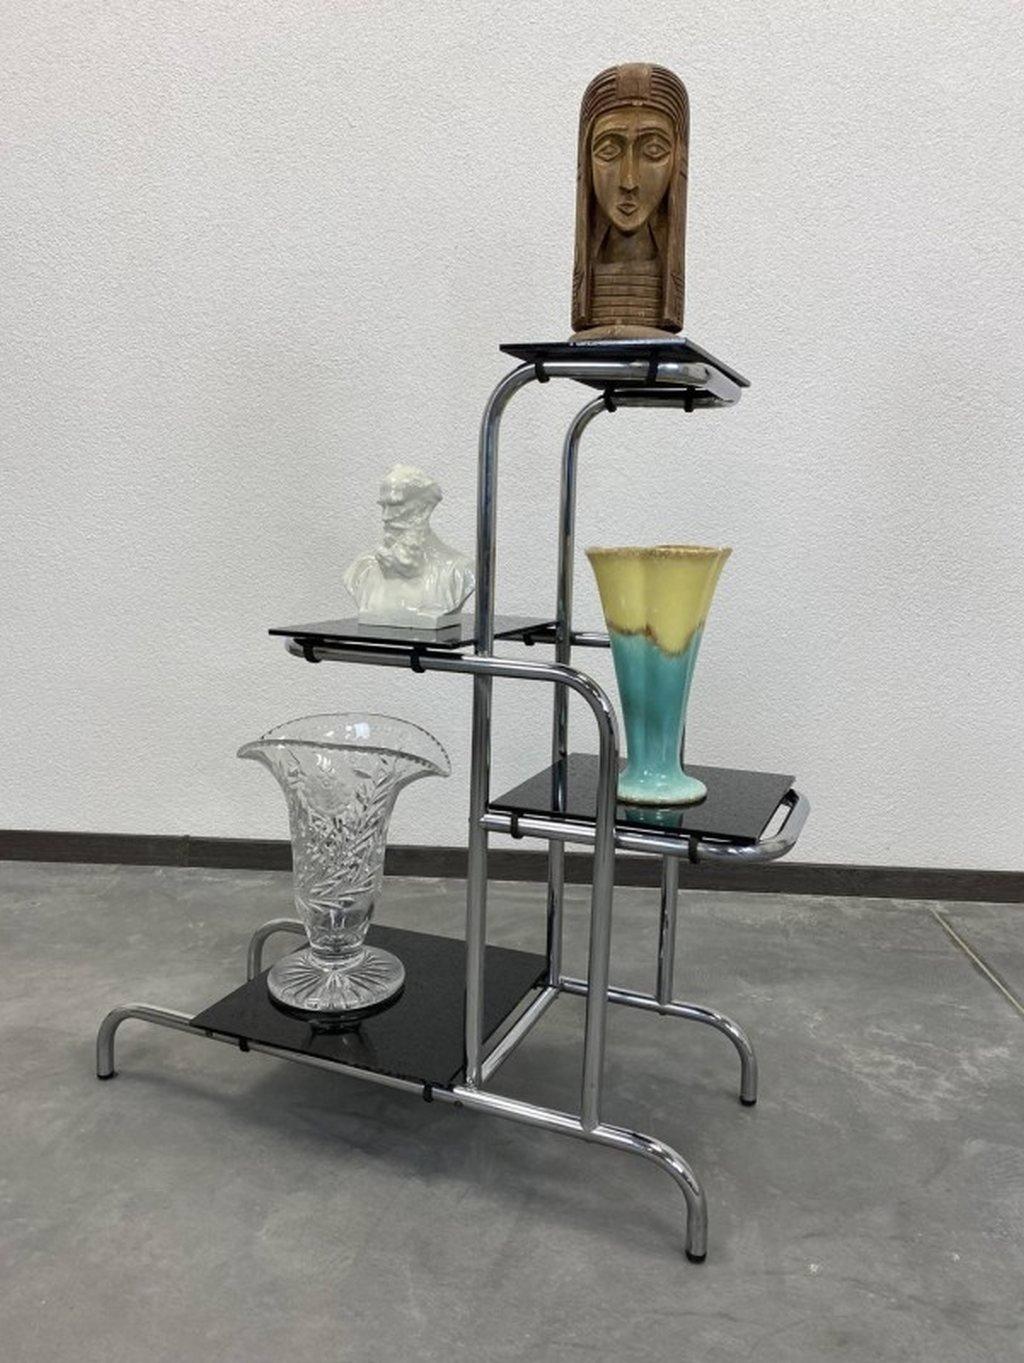 Functionalist plant stand by Emile Guyot for Thonet with black glass. Original very good condition with small signs of usage on glass parts.